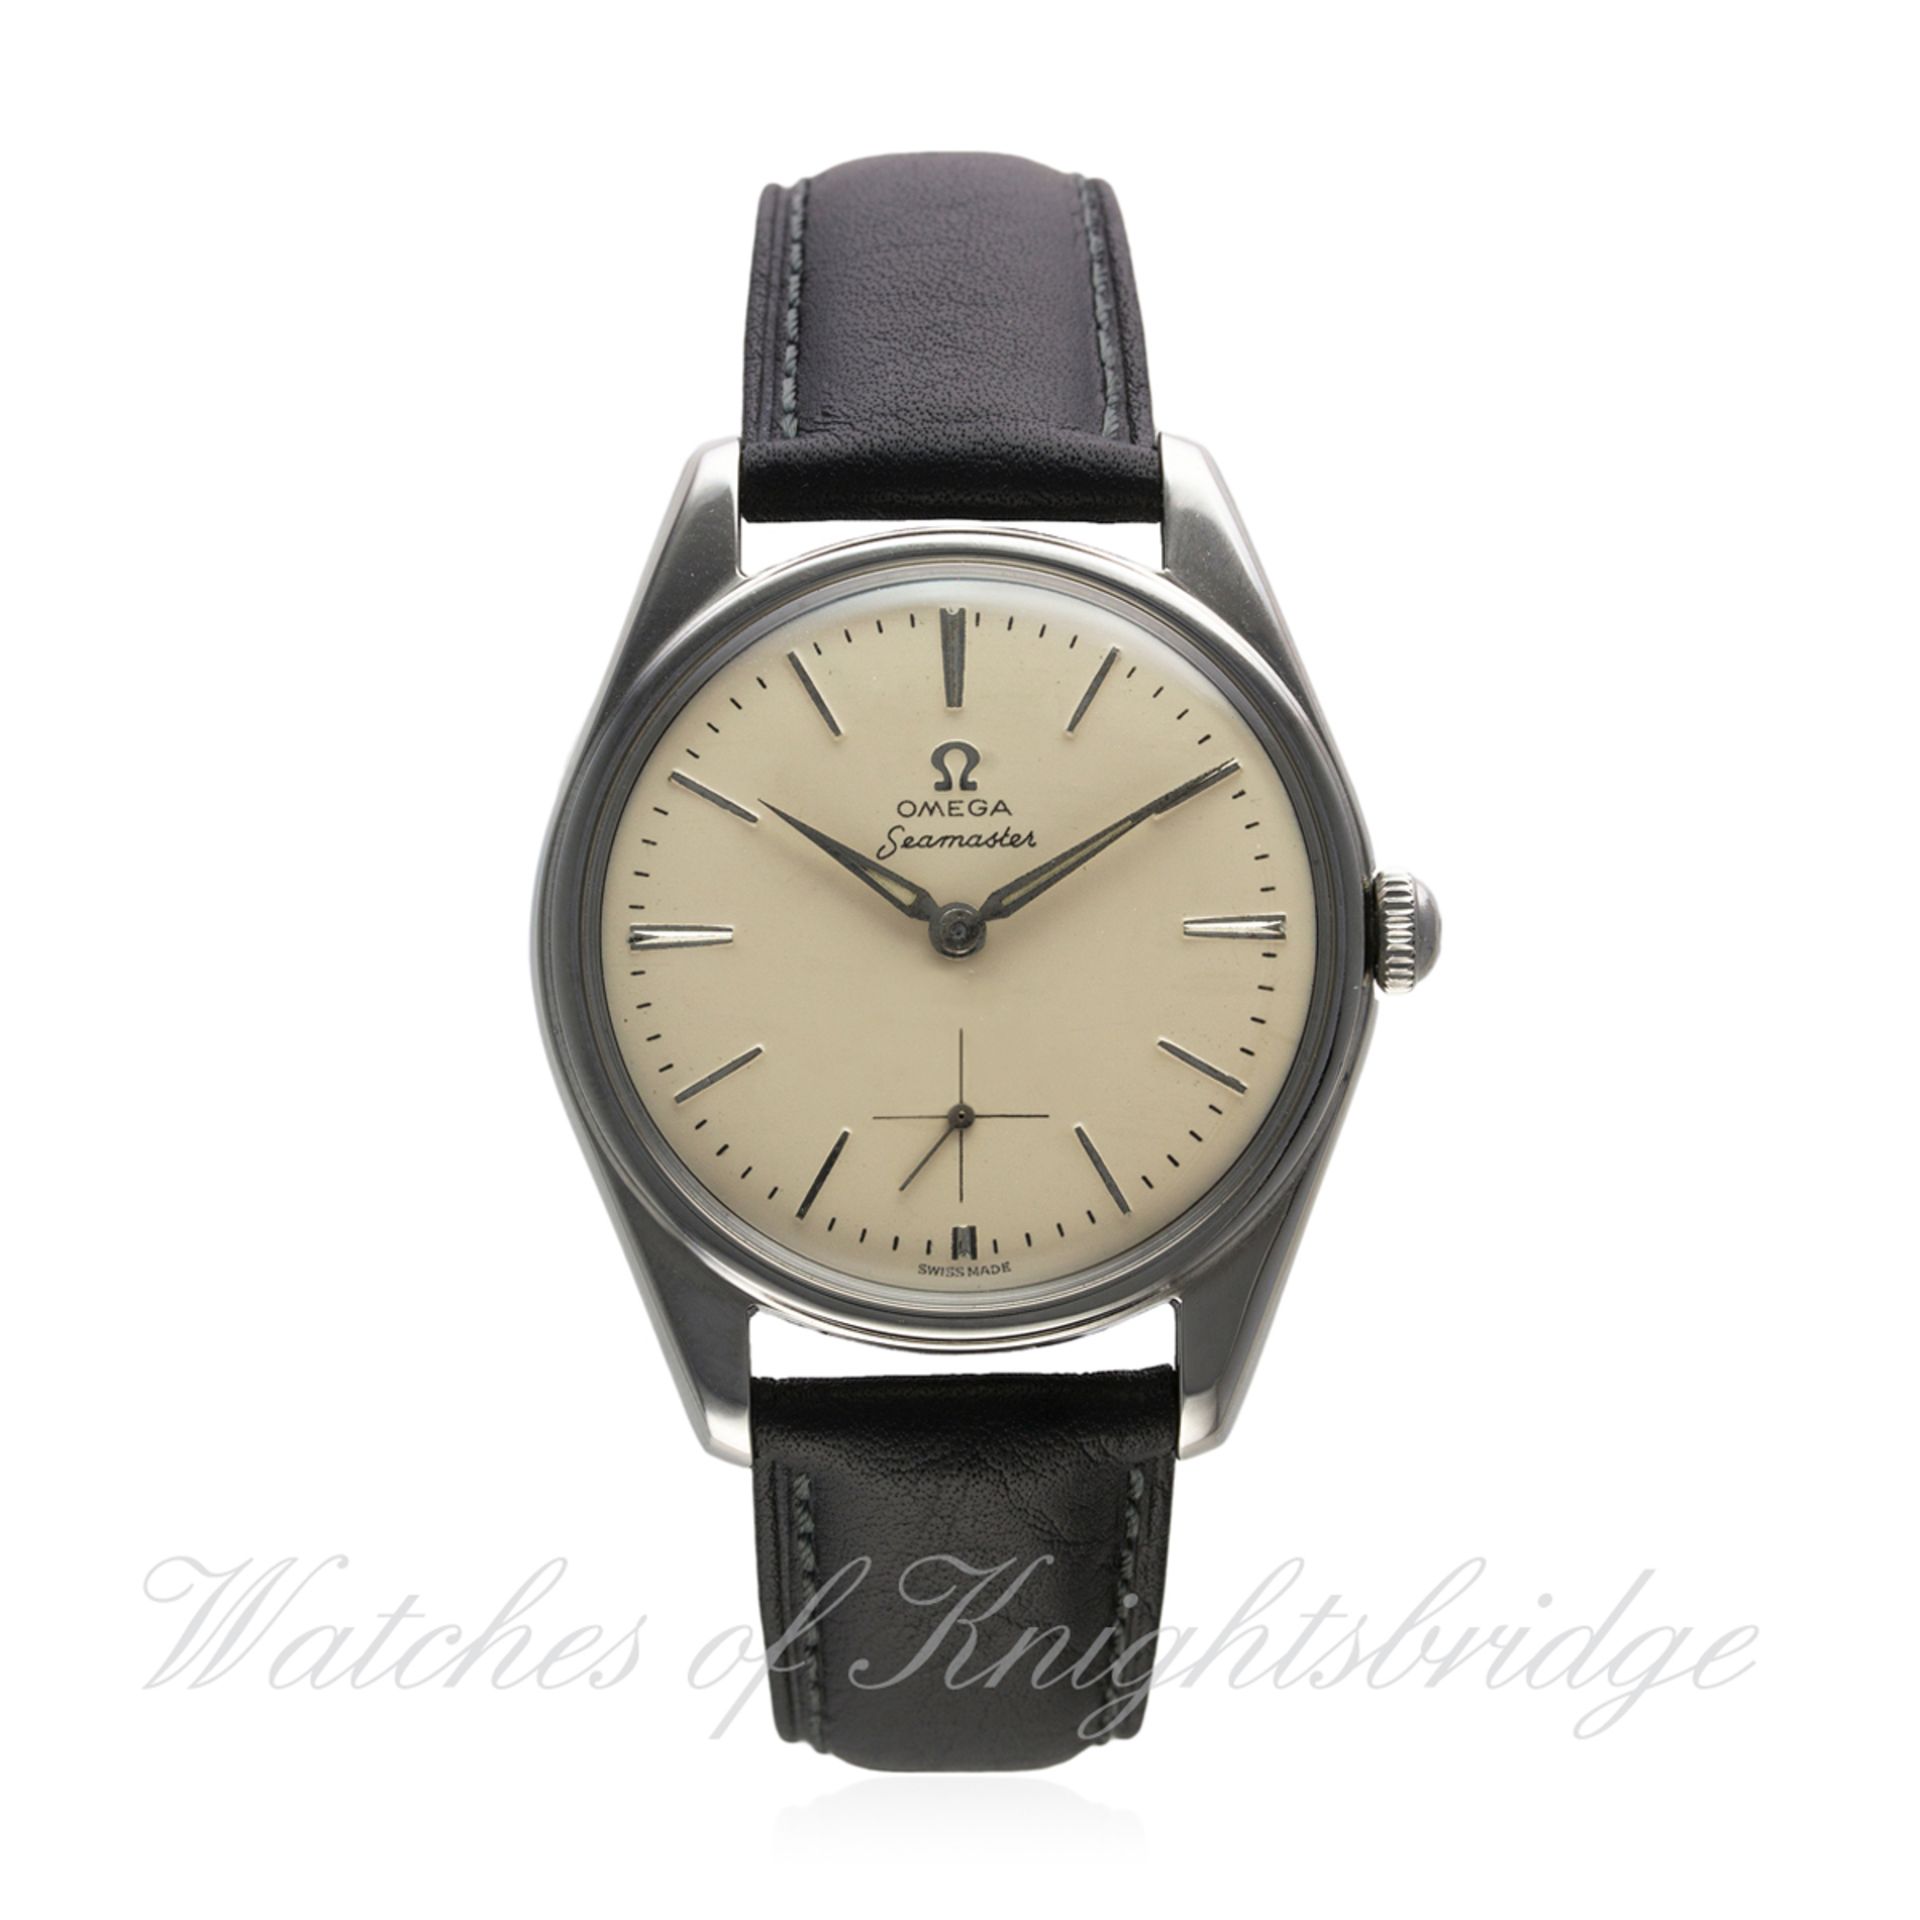 A GENTLEMAN'S LARGE SIZE STAINLESS STEEL OMEGA SEAMASTER WRIST WATCH CIRCA 1960, REF. 2990-1